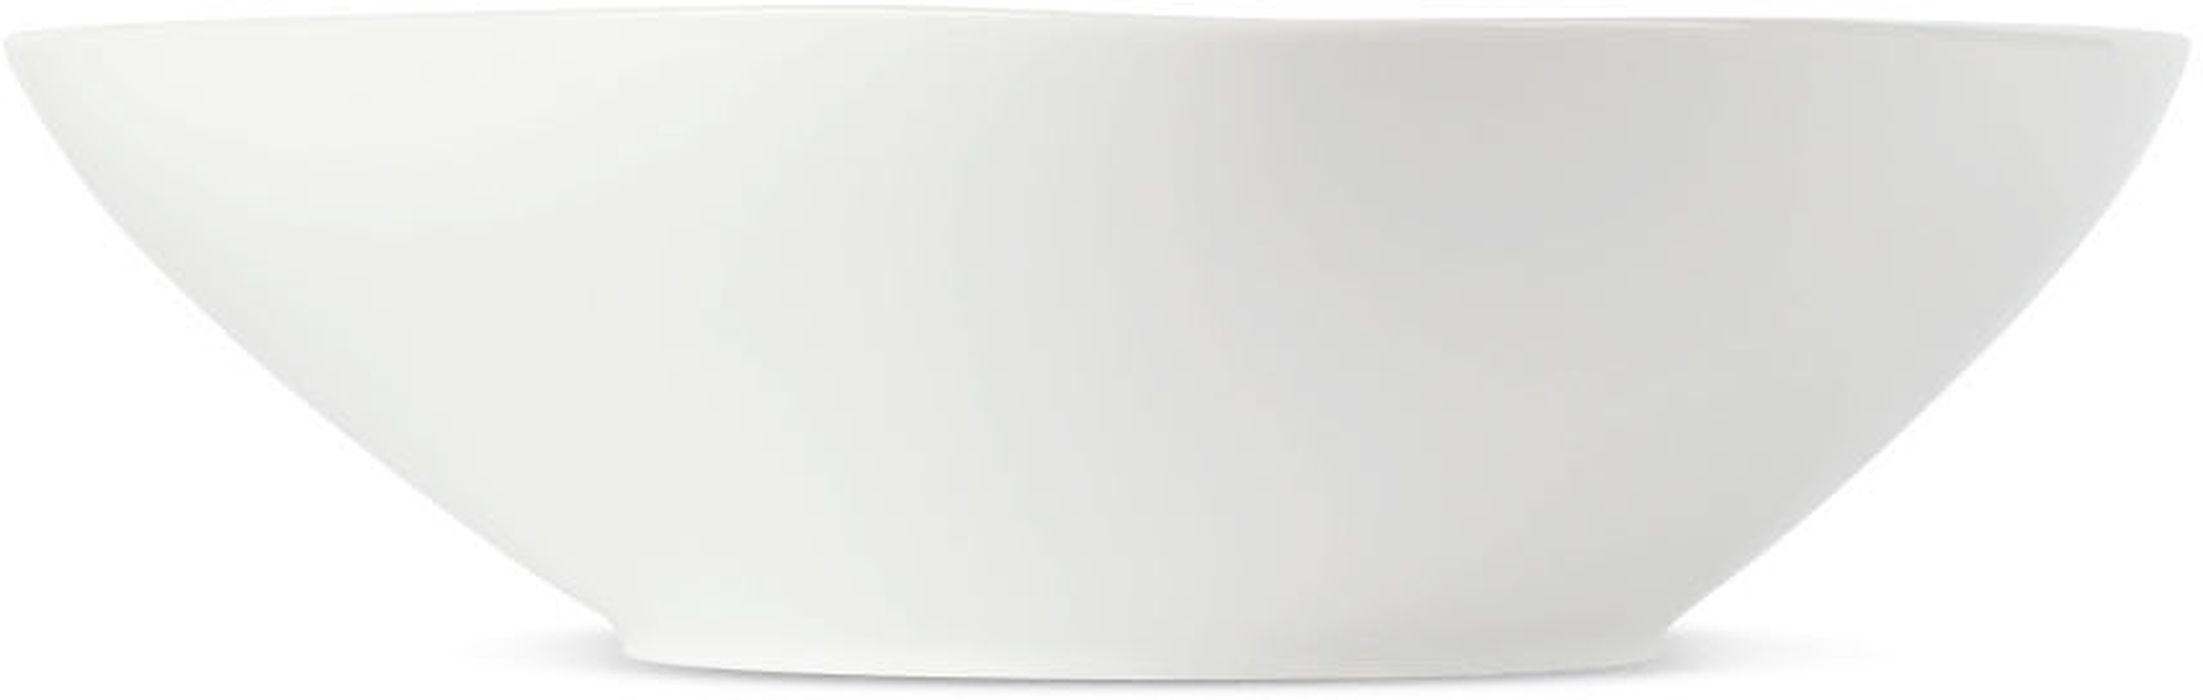 Alessi White Colombina Serving Bowl